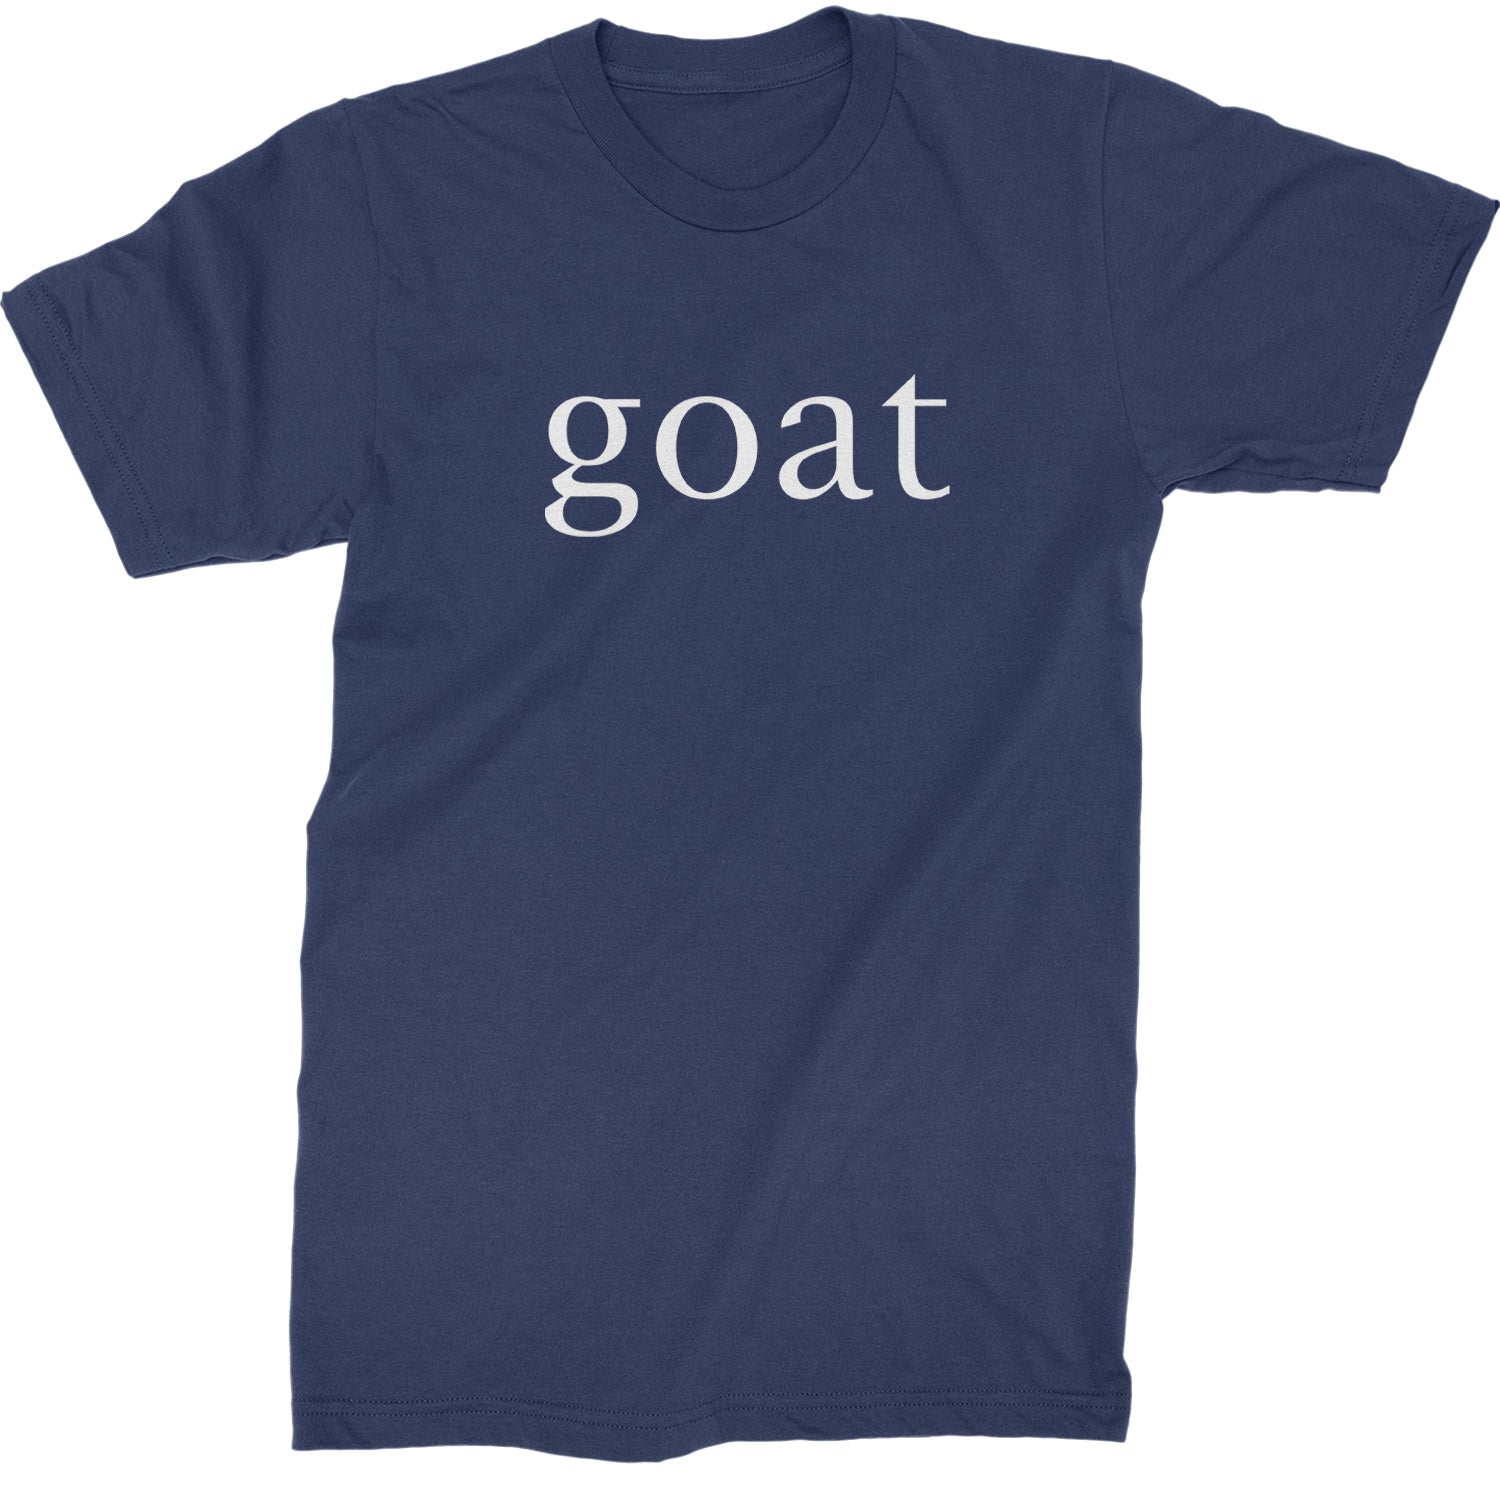 GOAT - Greatest Of All Time  Mens T-shirt Navy Blue